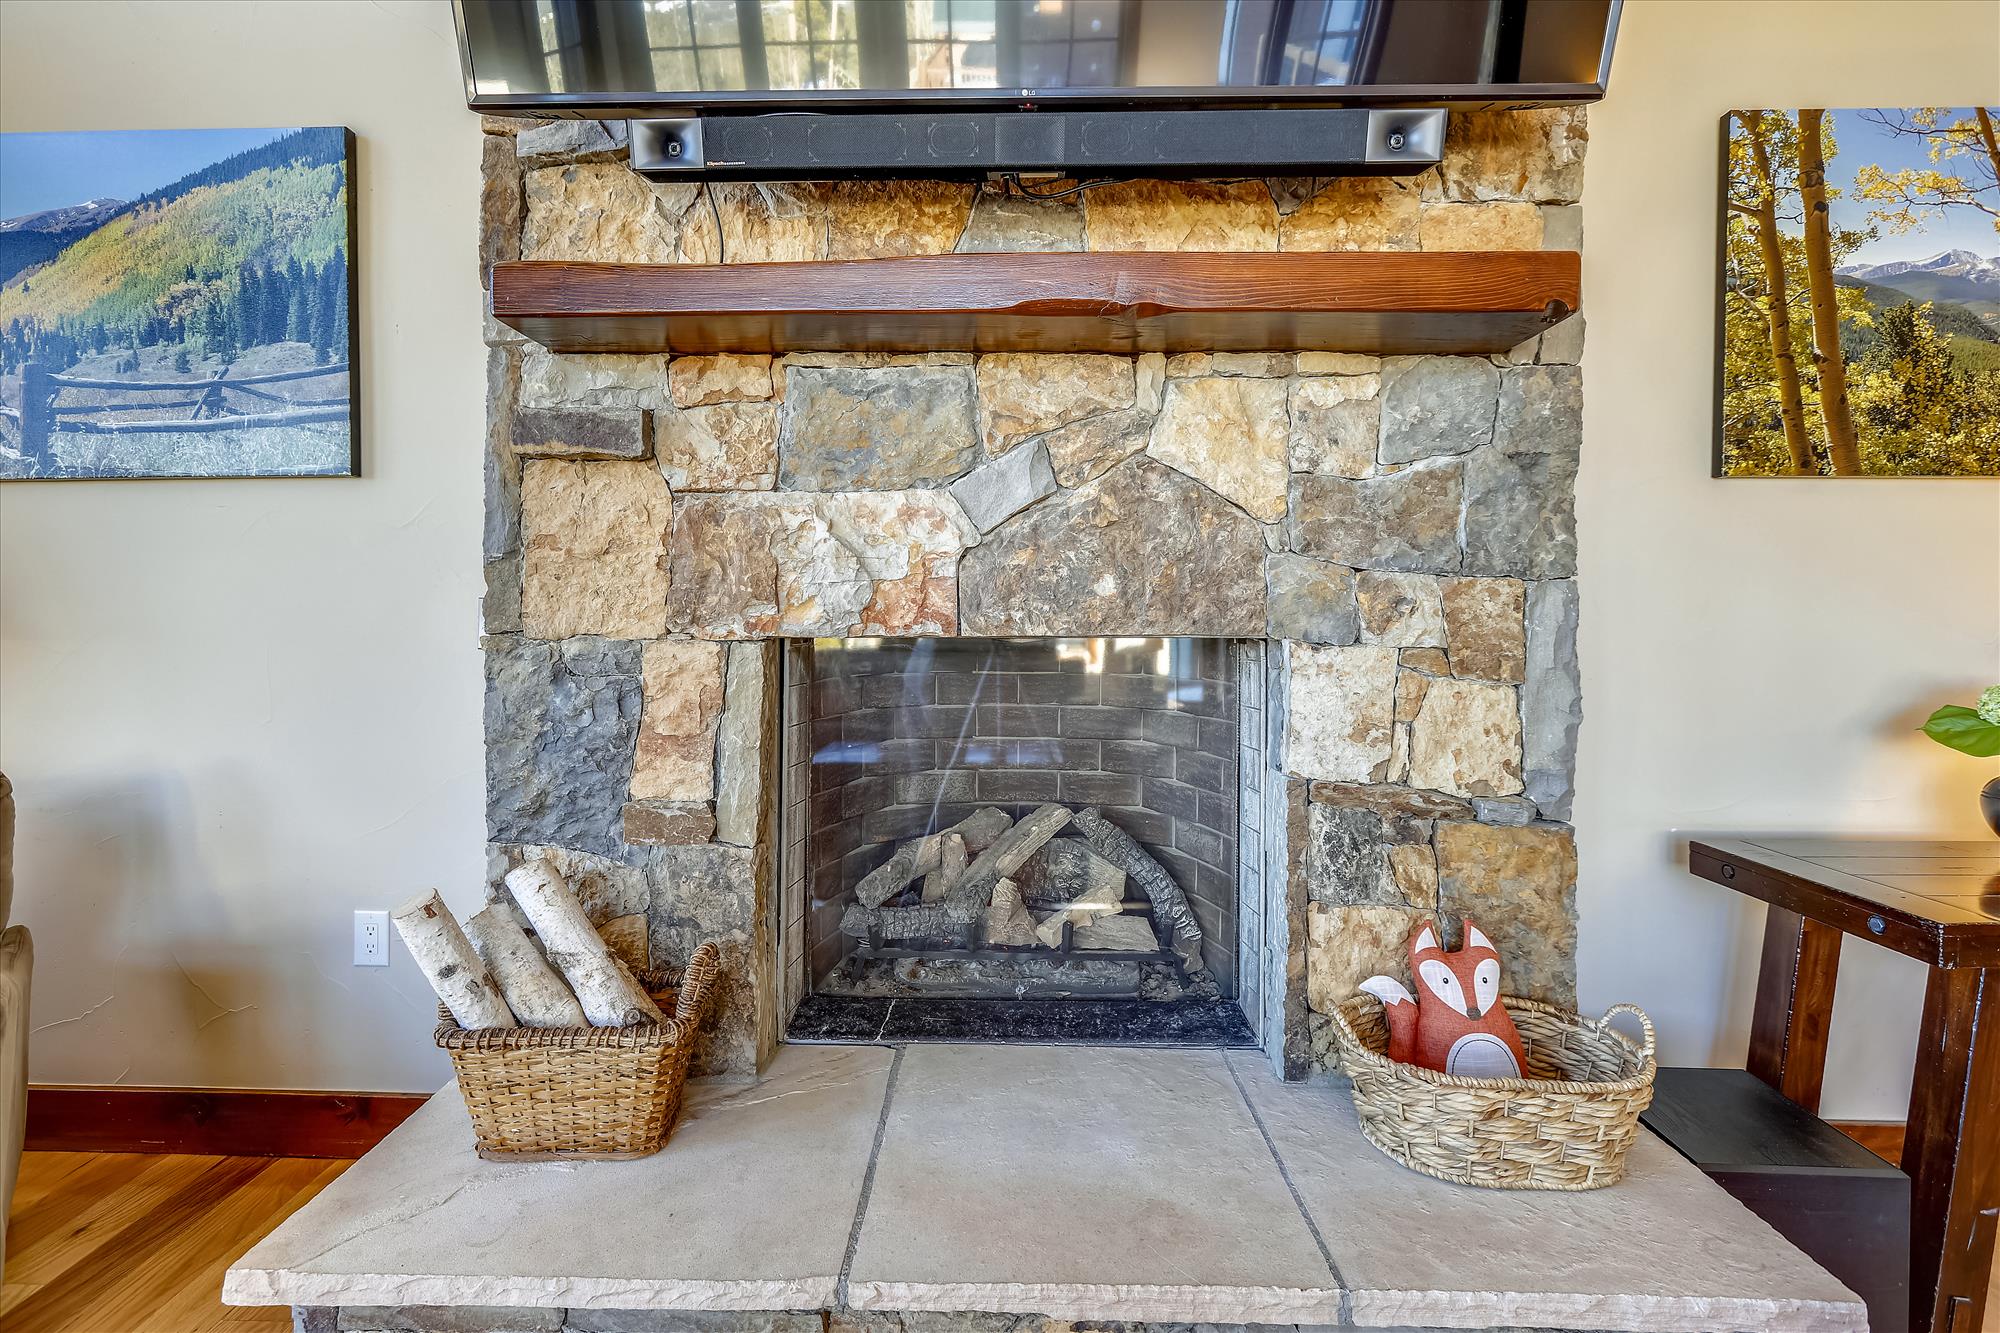 Relax by this cozy warm fireplace with beautiful ambiance